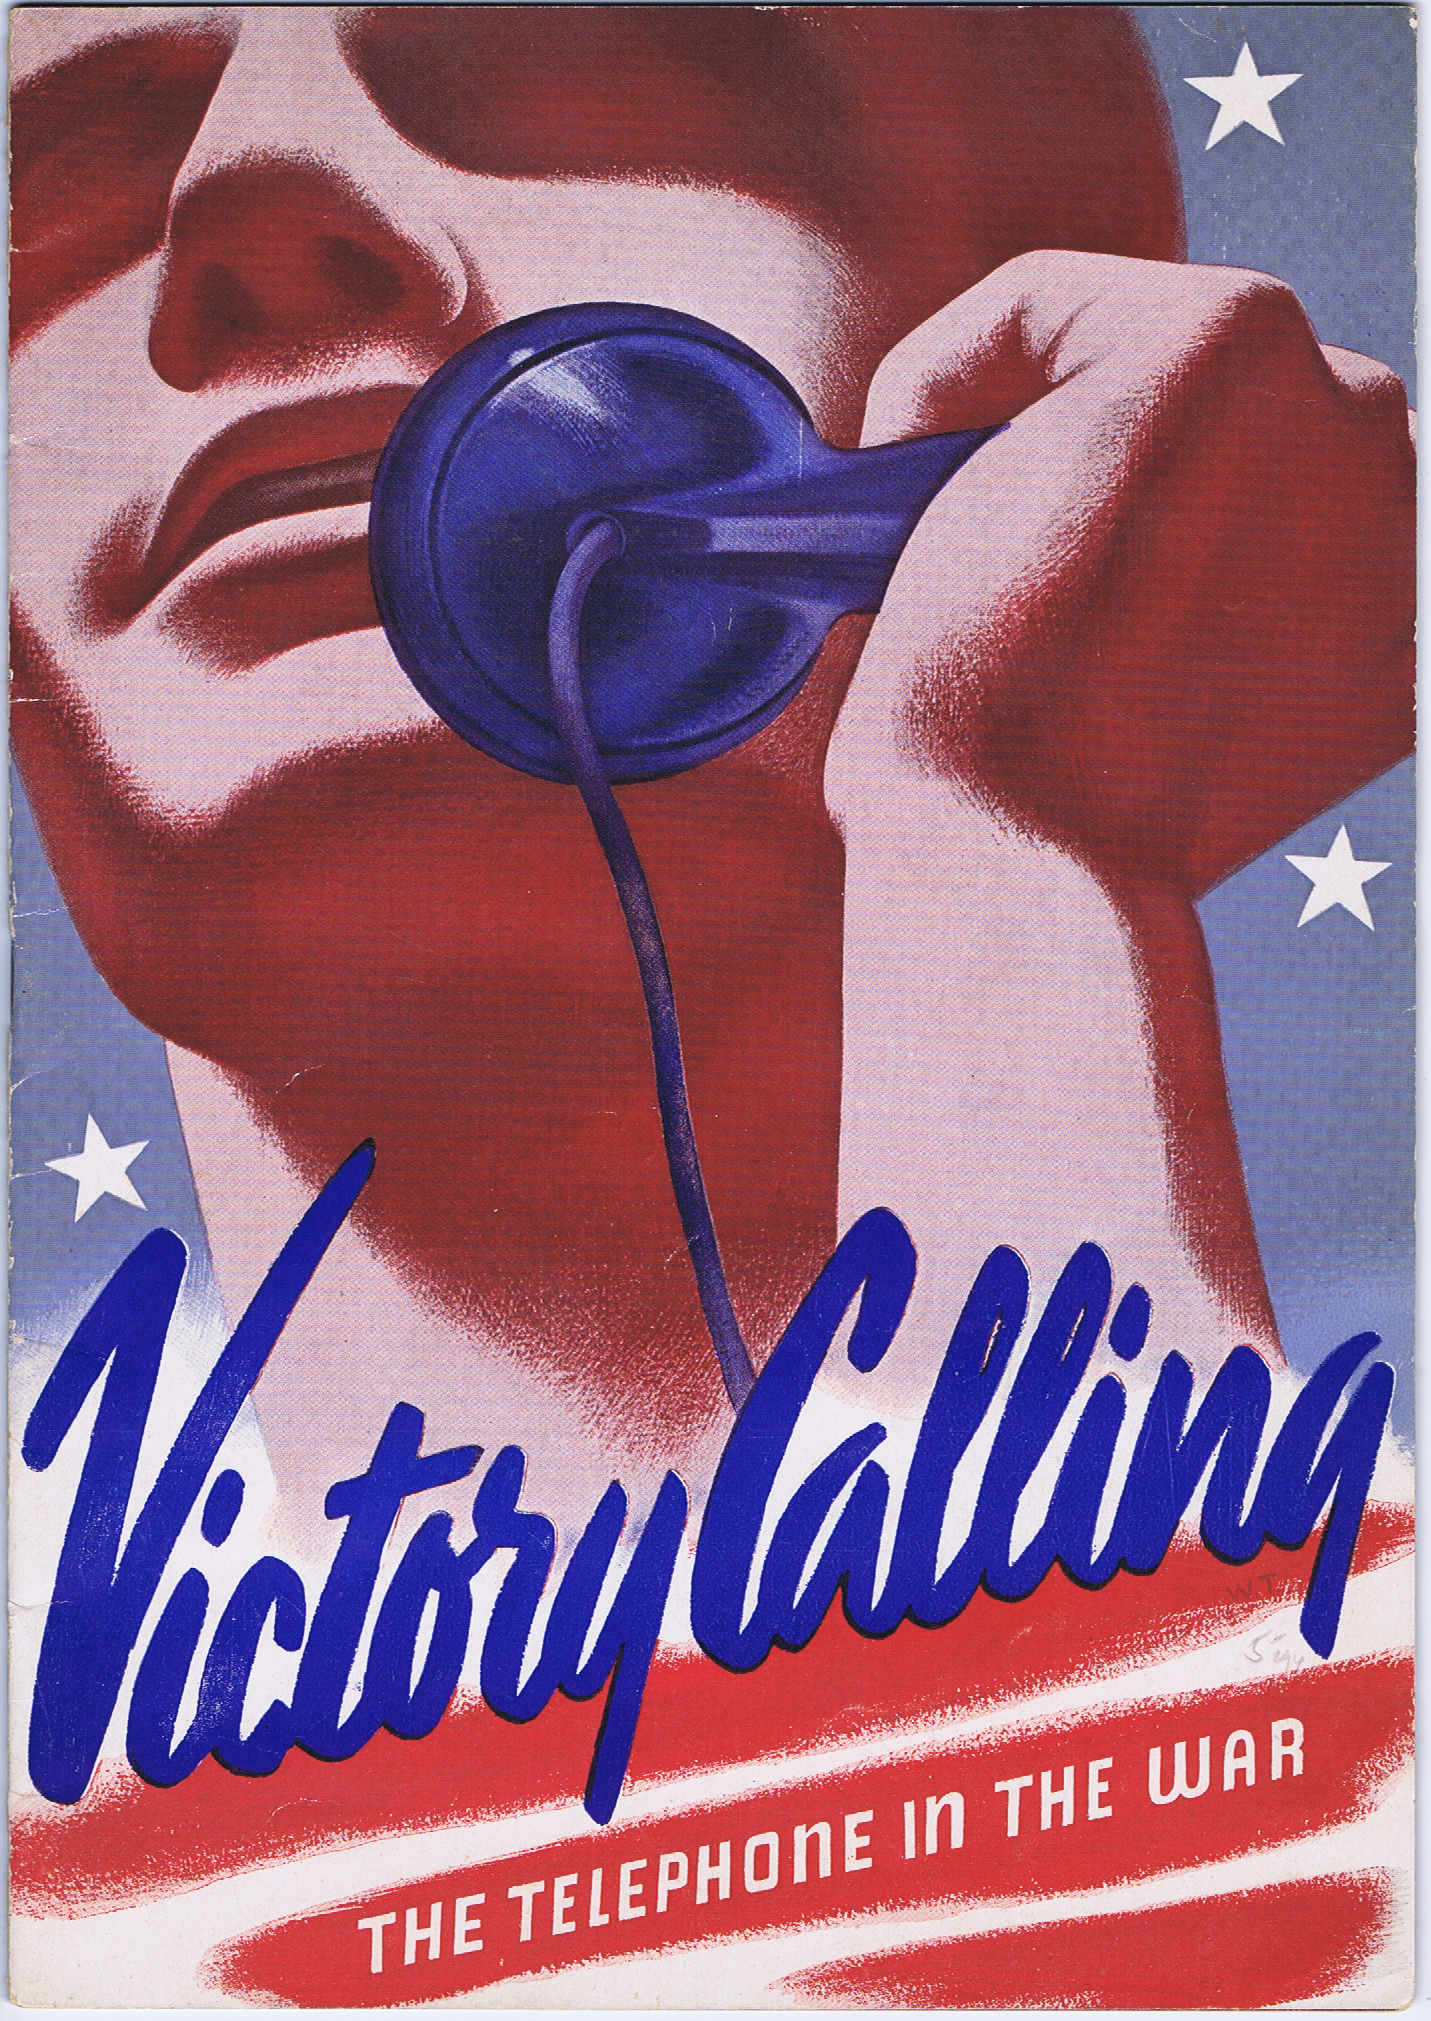 J708	VICTORY CALLING - THE TELEPHONE IN THE WAR